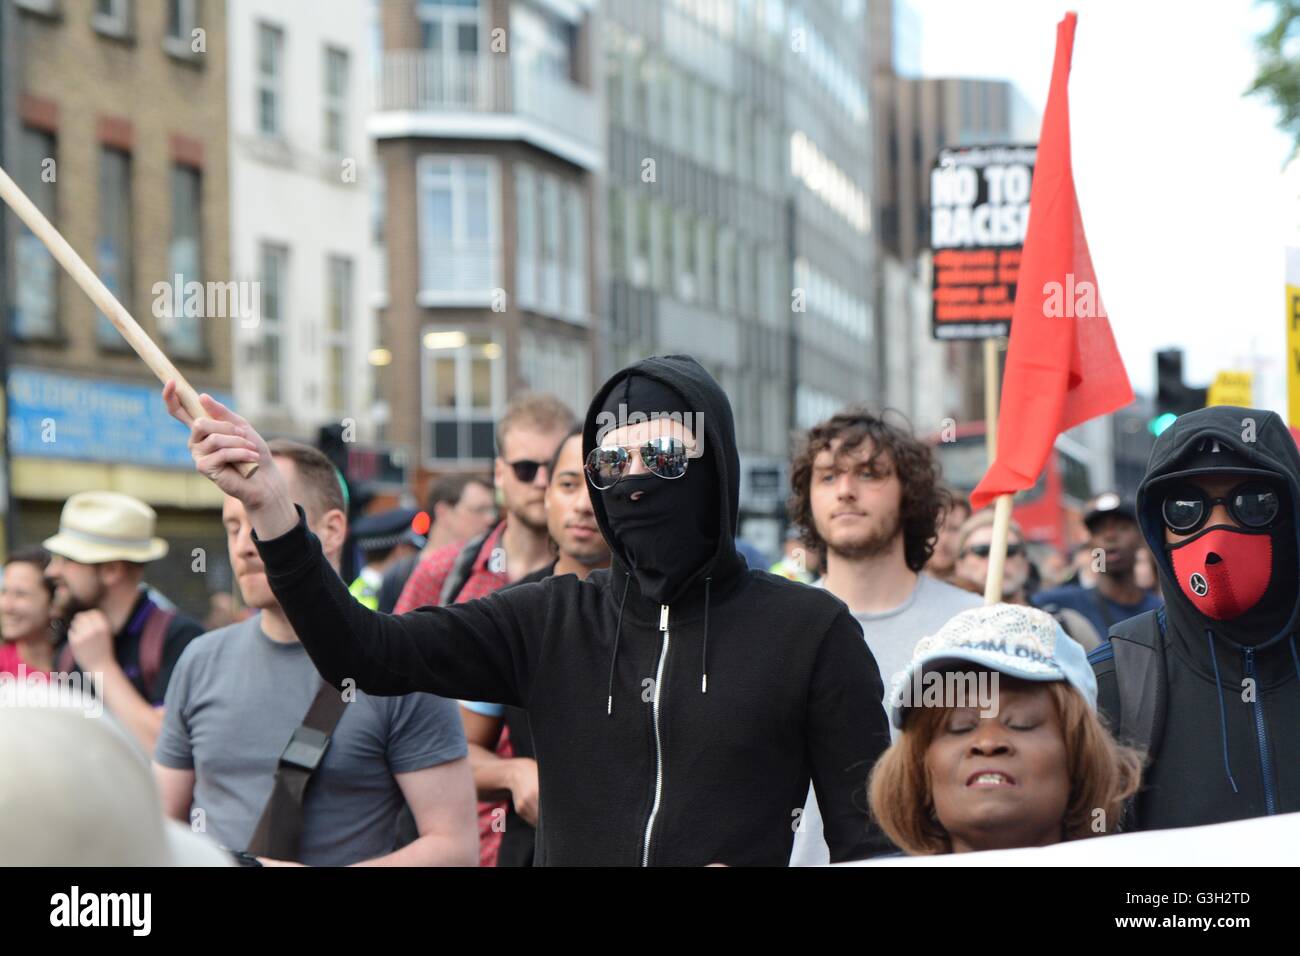 London, UK. 24 June, 2016. Pro-europe and migrant rally held in London.  Masked protesters were marching down the street with their anti-government flags. Credit:  Marc Ward/Alamy Live News Stock Photo